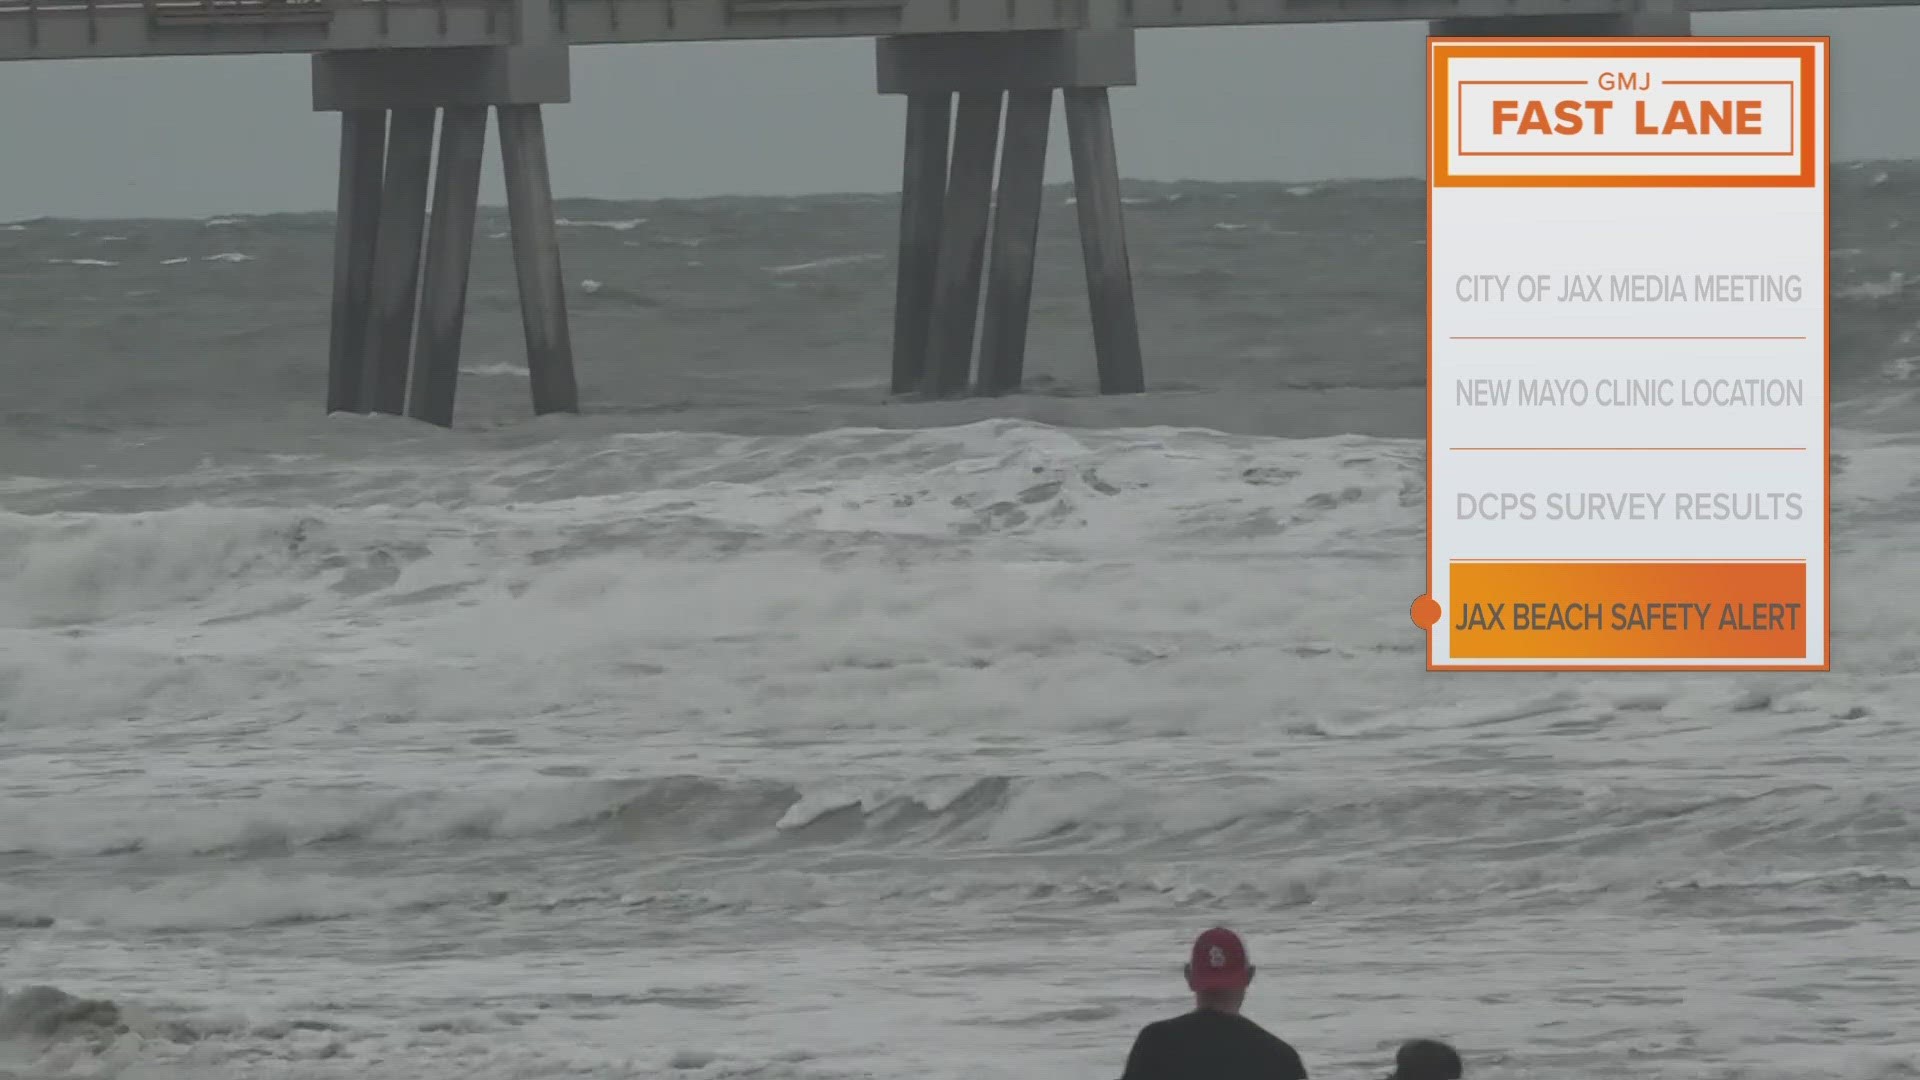 Lifeguards with Jacksonville Beach Ocean Rescue say dangerous, life-threatening rip currents are expected at Jacksonville Beach Wednesday through the weekend.